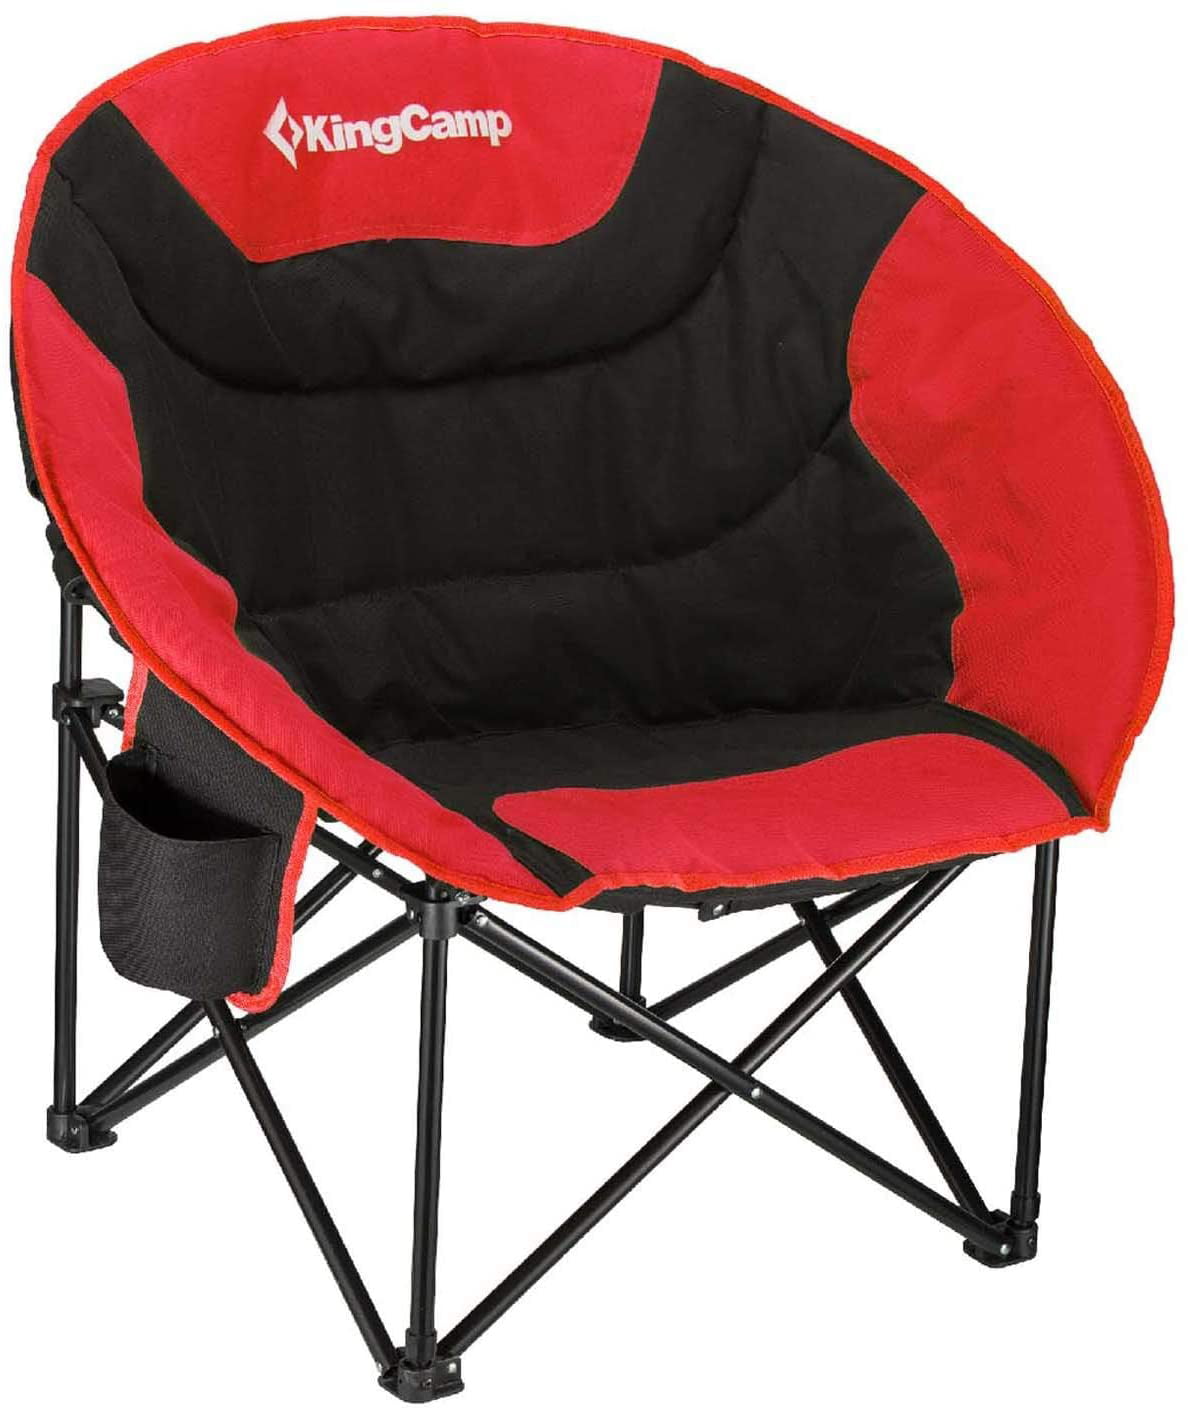 DecorX Camping Chair Moon Round Saucer Chair Folding